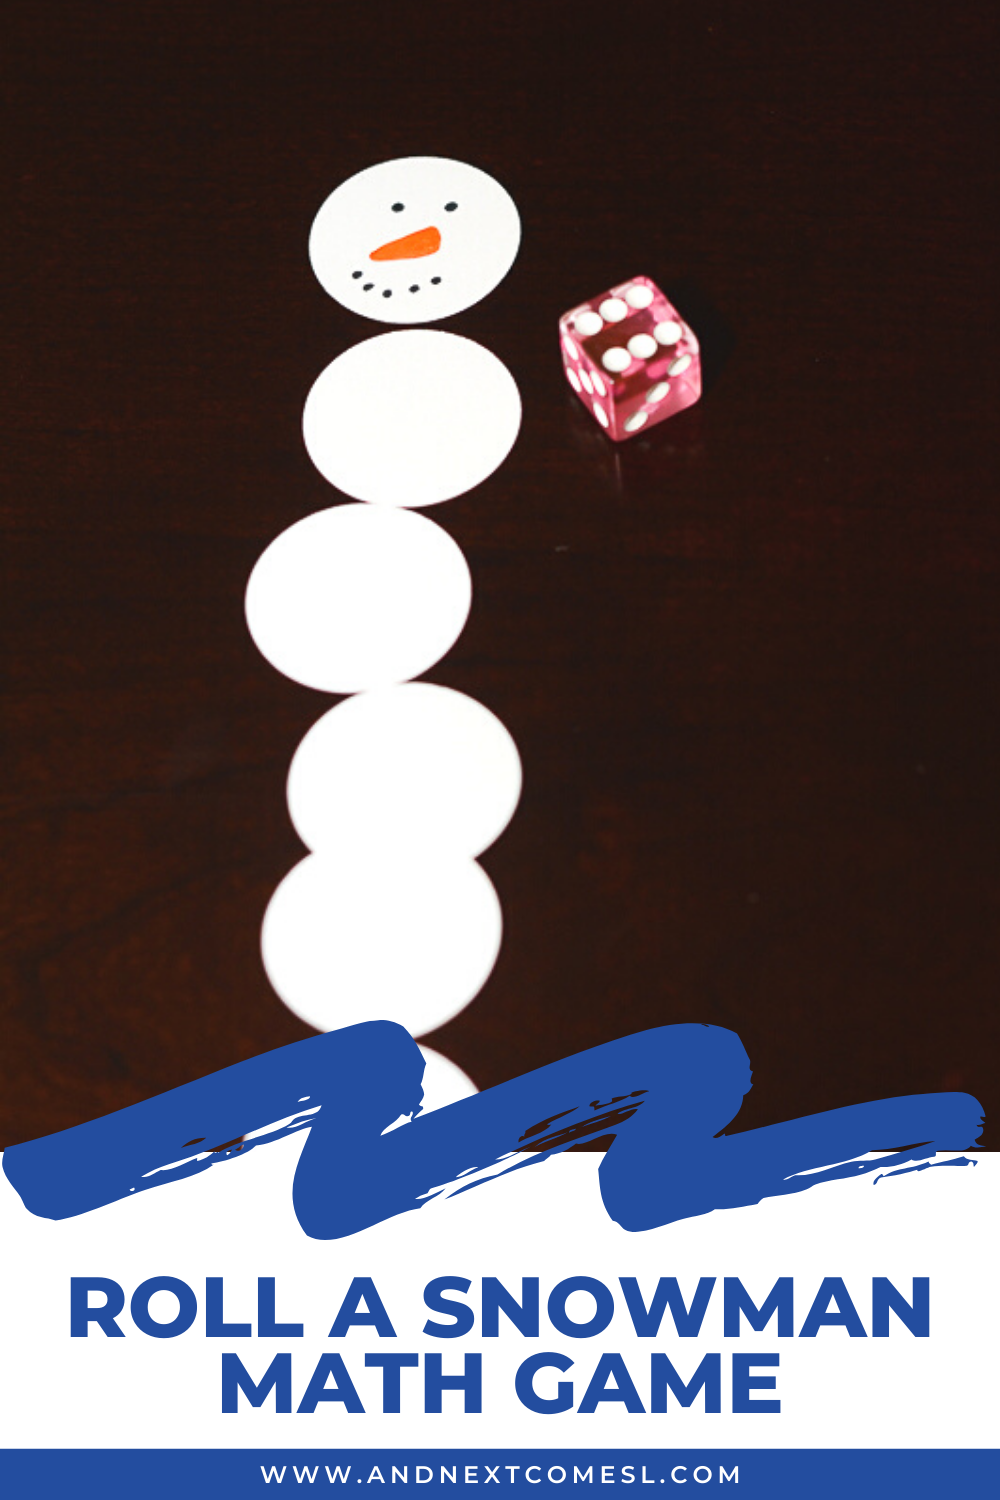 Roll a snowman math game for kids - great for toddlers, preschool, or kindergarten!